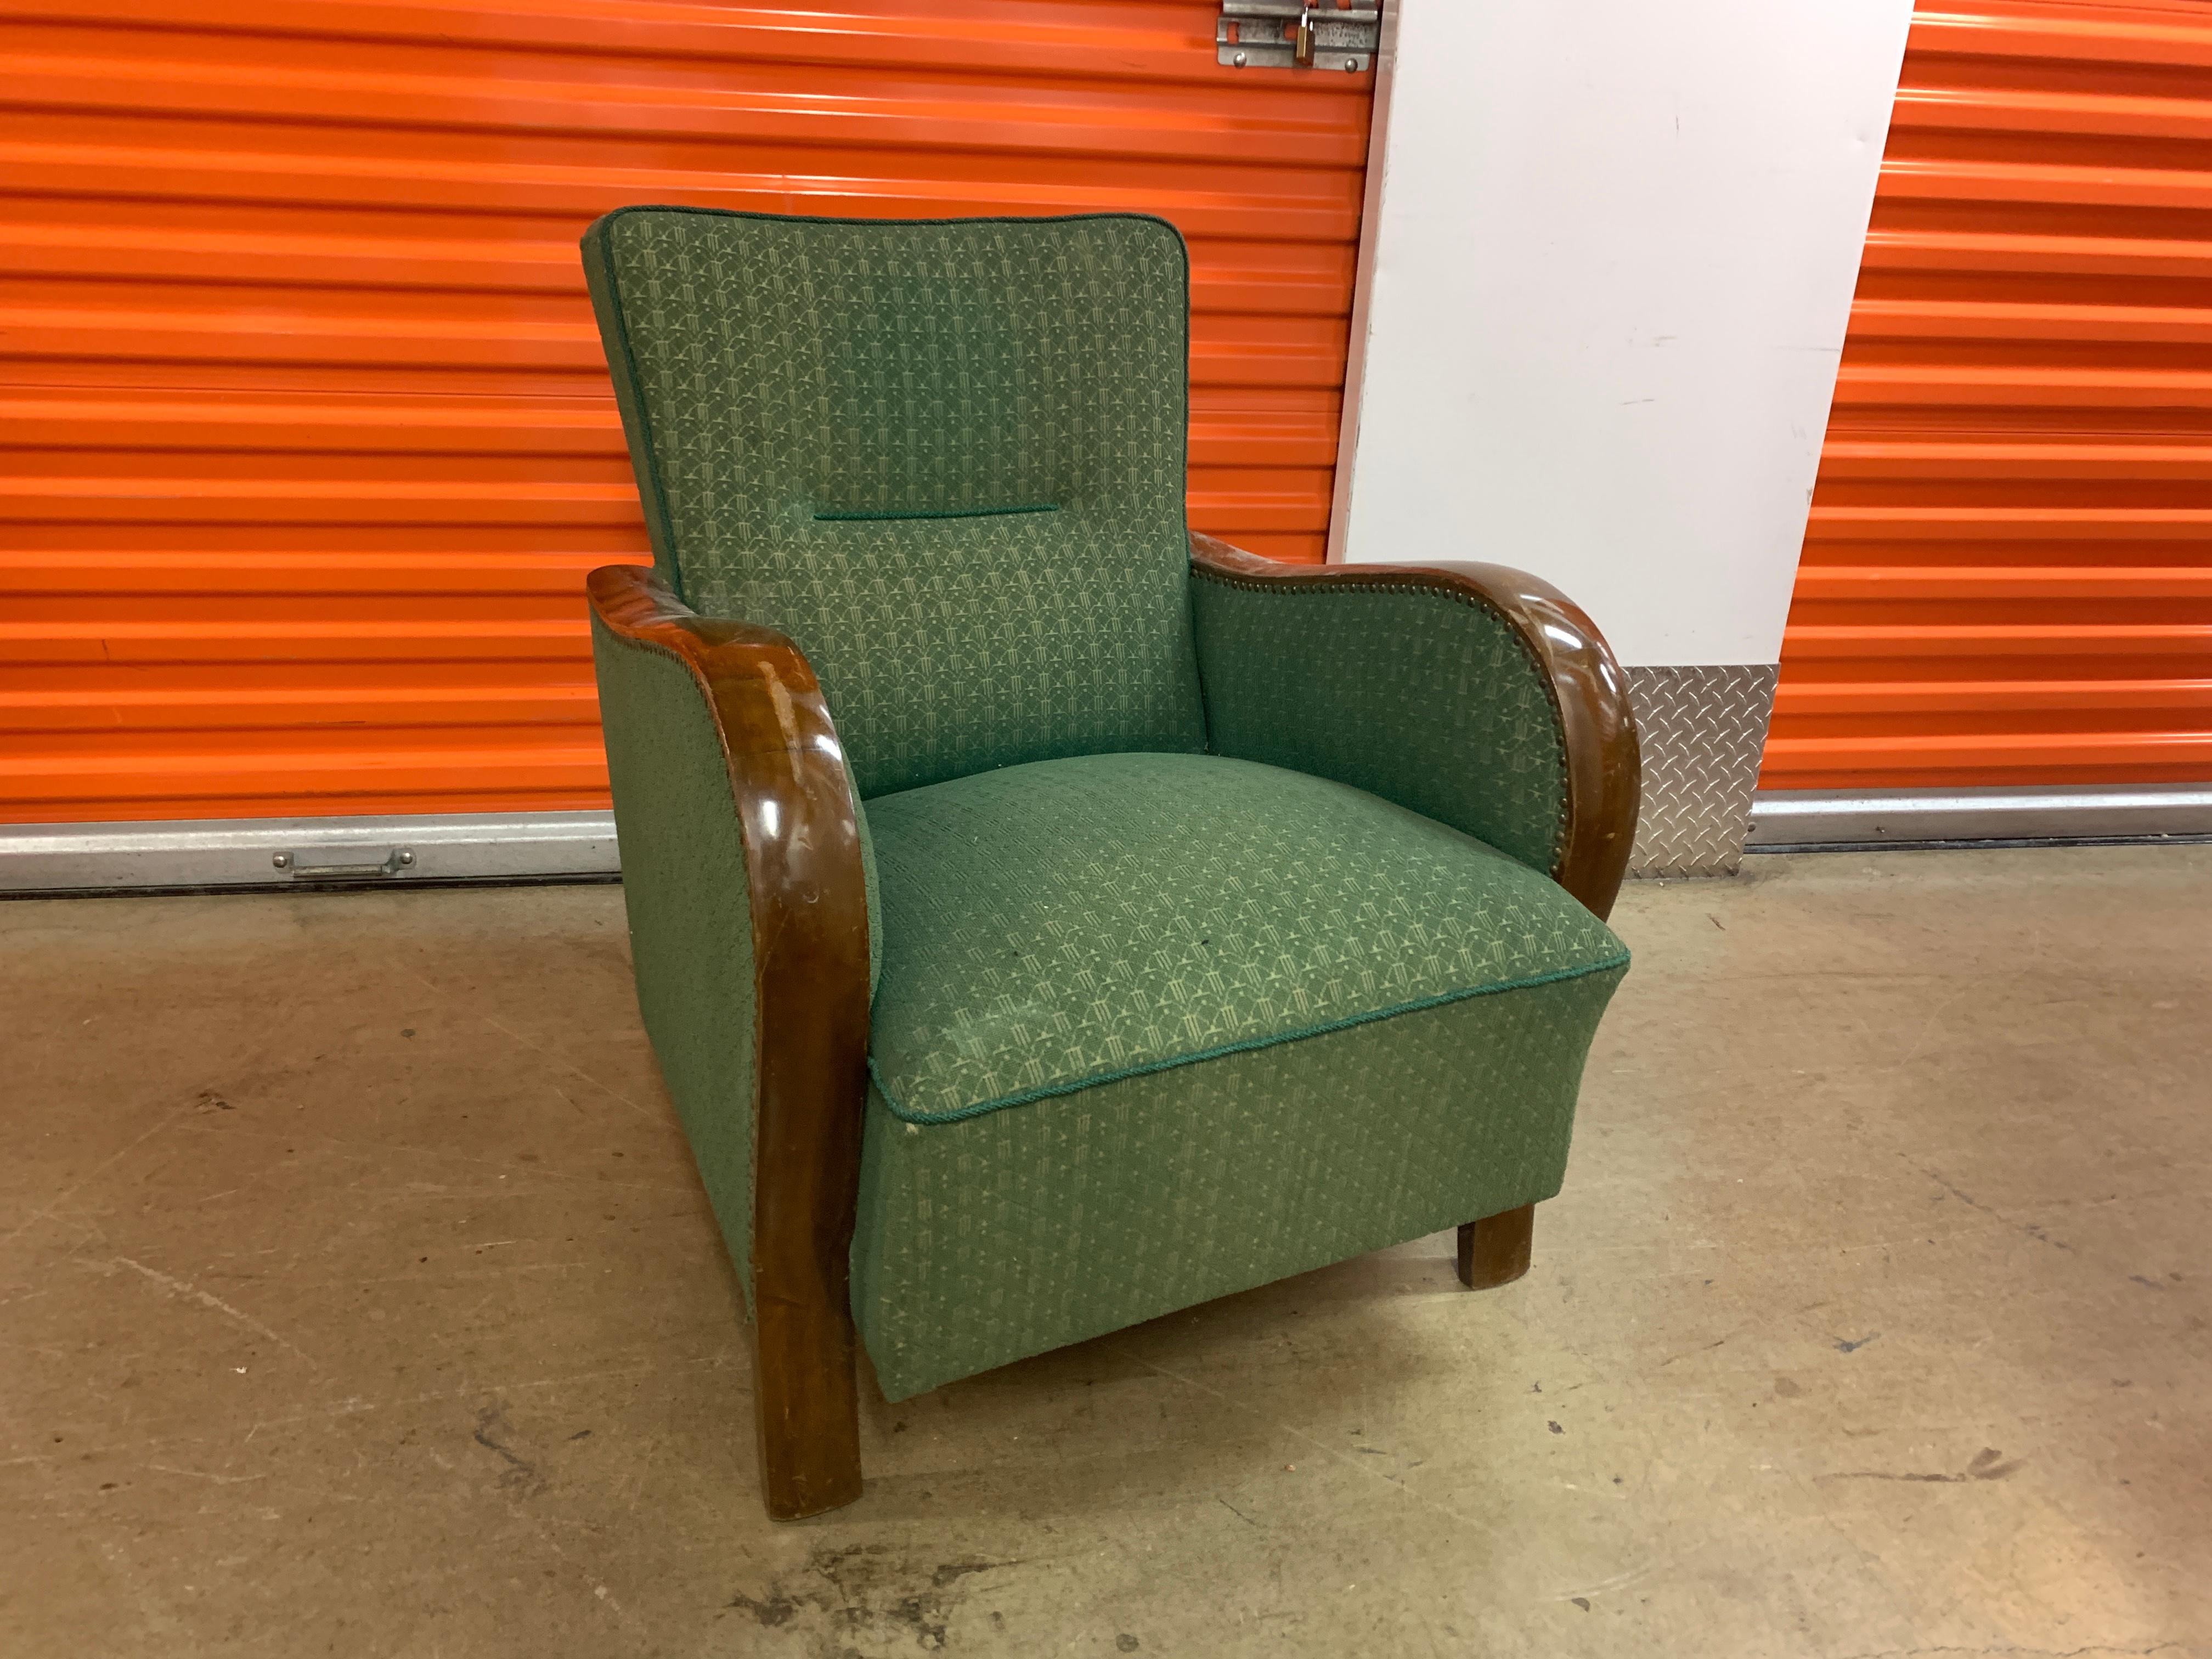 A welcoming pair of vintage armchairs upholstered with it's original sophisticated green fabric.

Size: Arm height 24